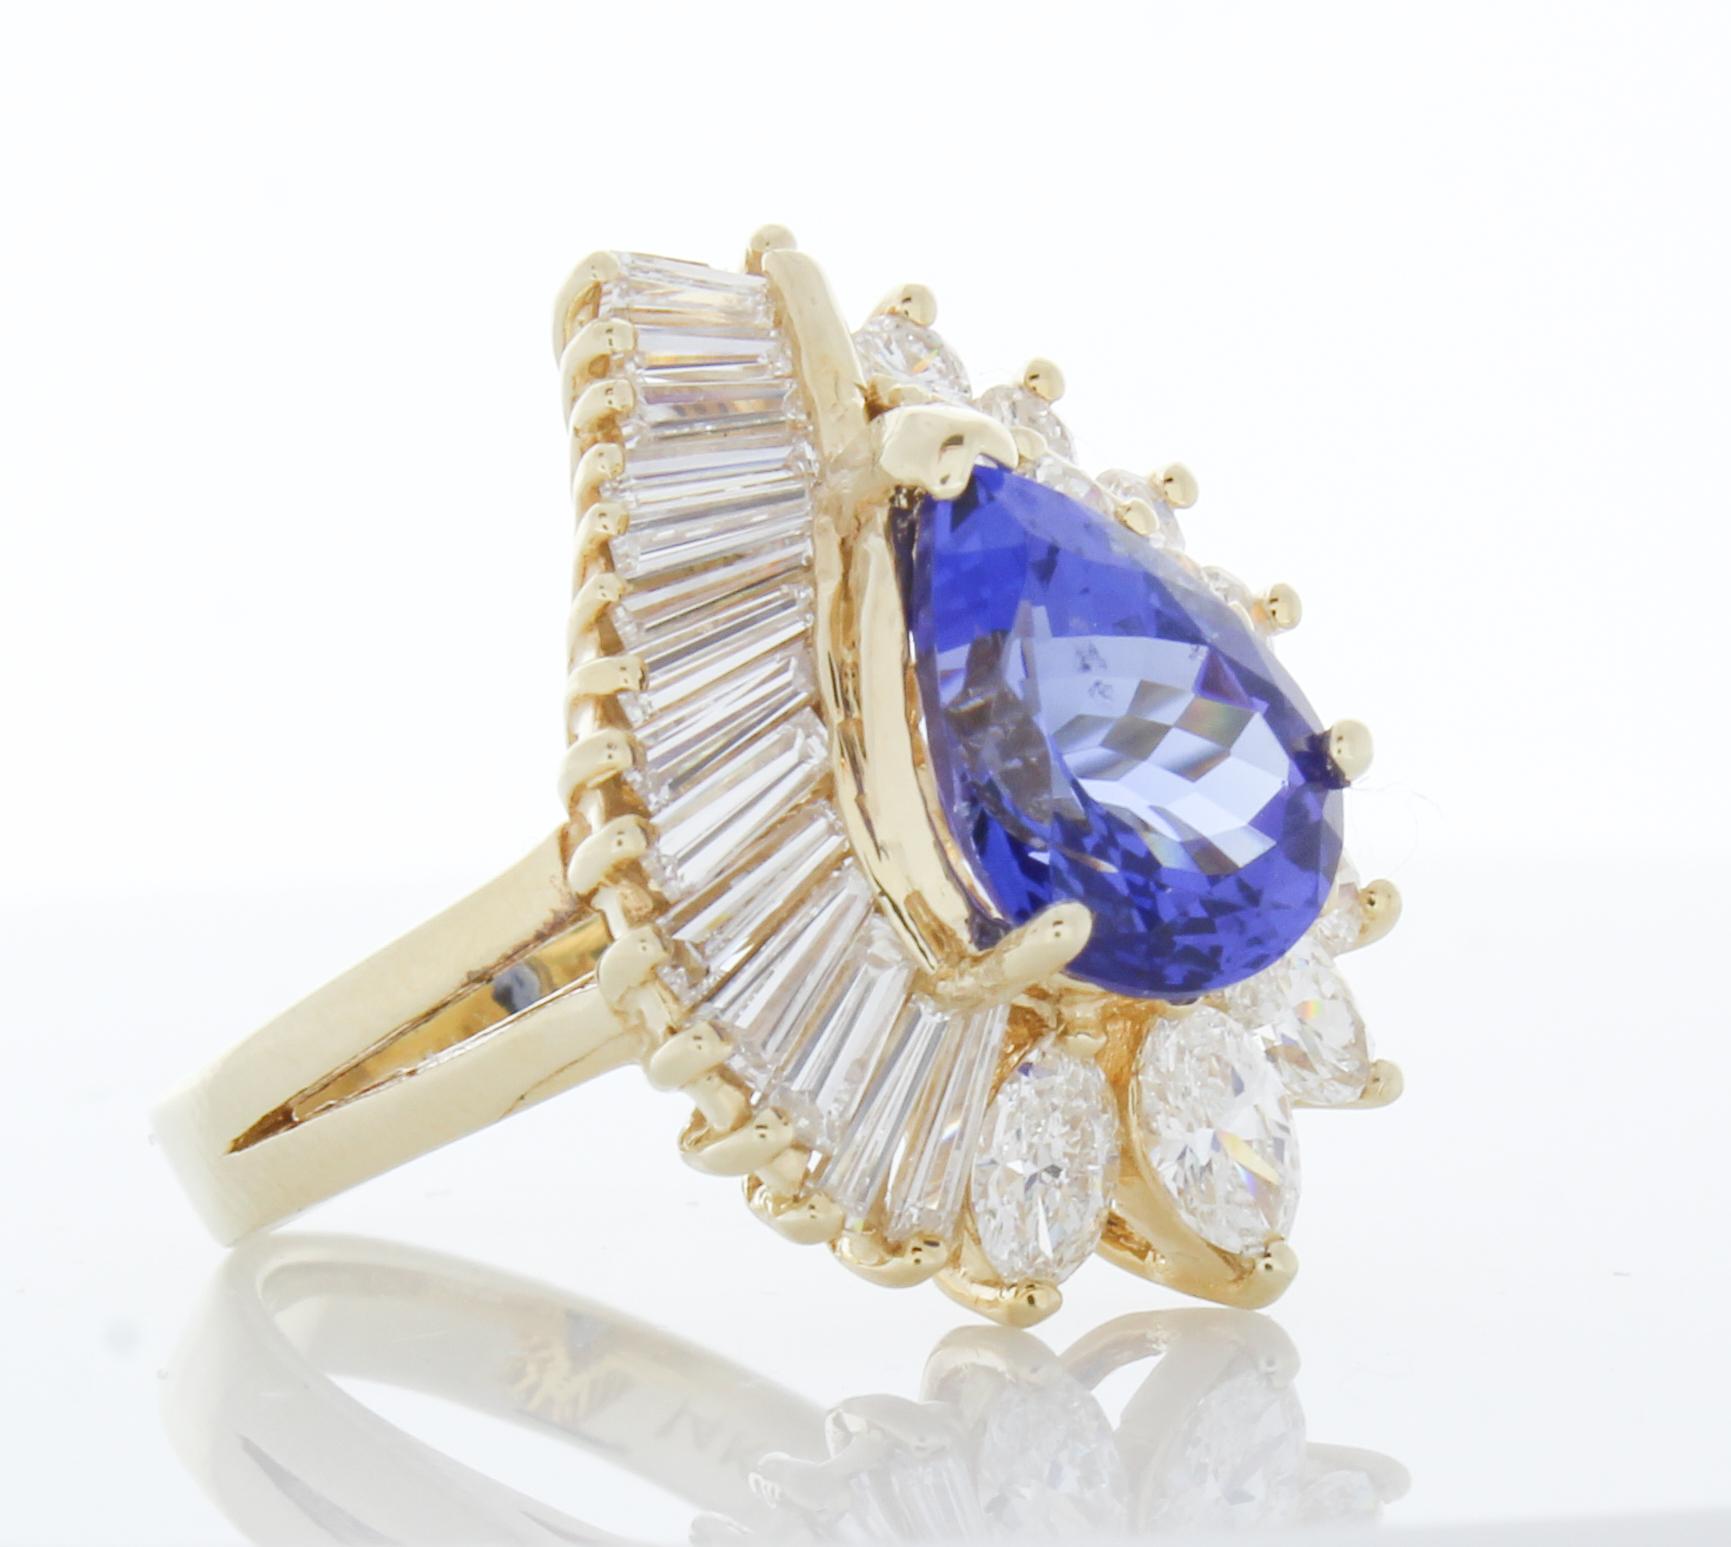 2.64 Carat Pear Shaped Tanzanite & Diamond Cocktail Ring in 14K Yellow Gold In New Condition For Sale In Chicago, IL